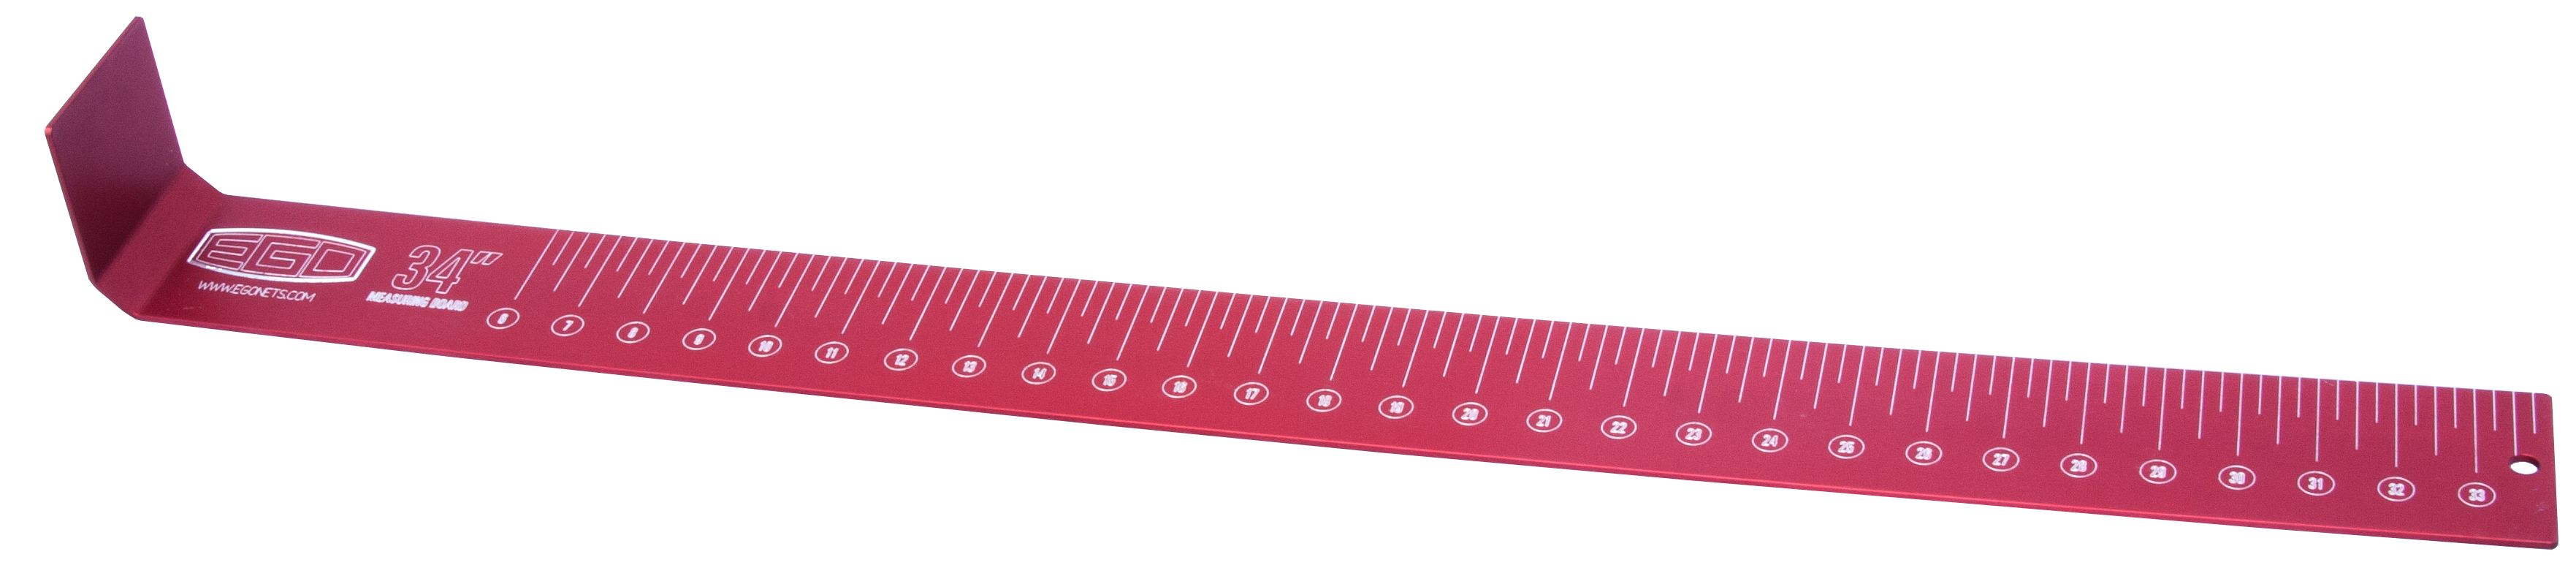 https://cs1.0ps.us/original/opplanet-ego-measuring-board-34in-3-16in-red-annodize-alum-plate-laser-etched-73003-main